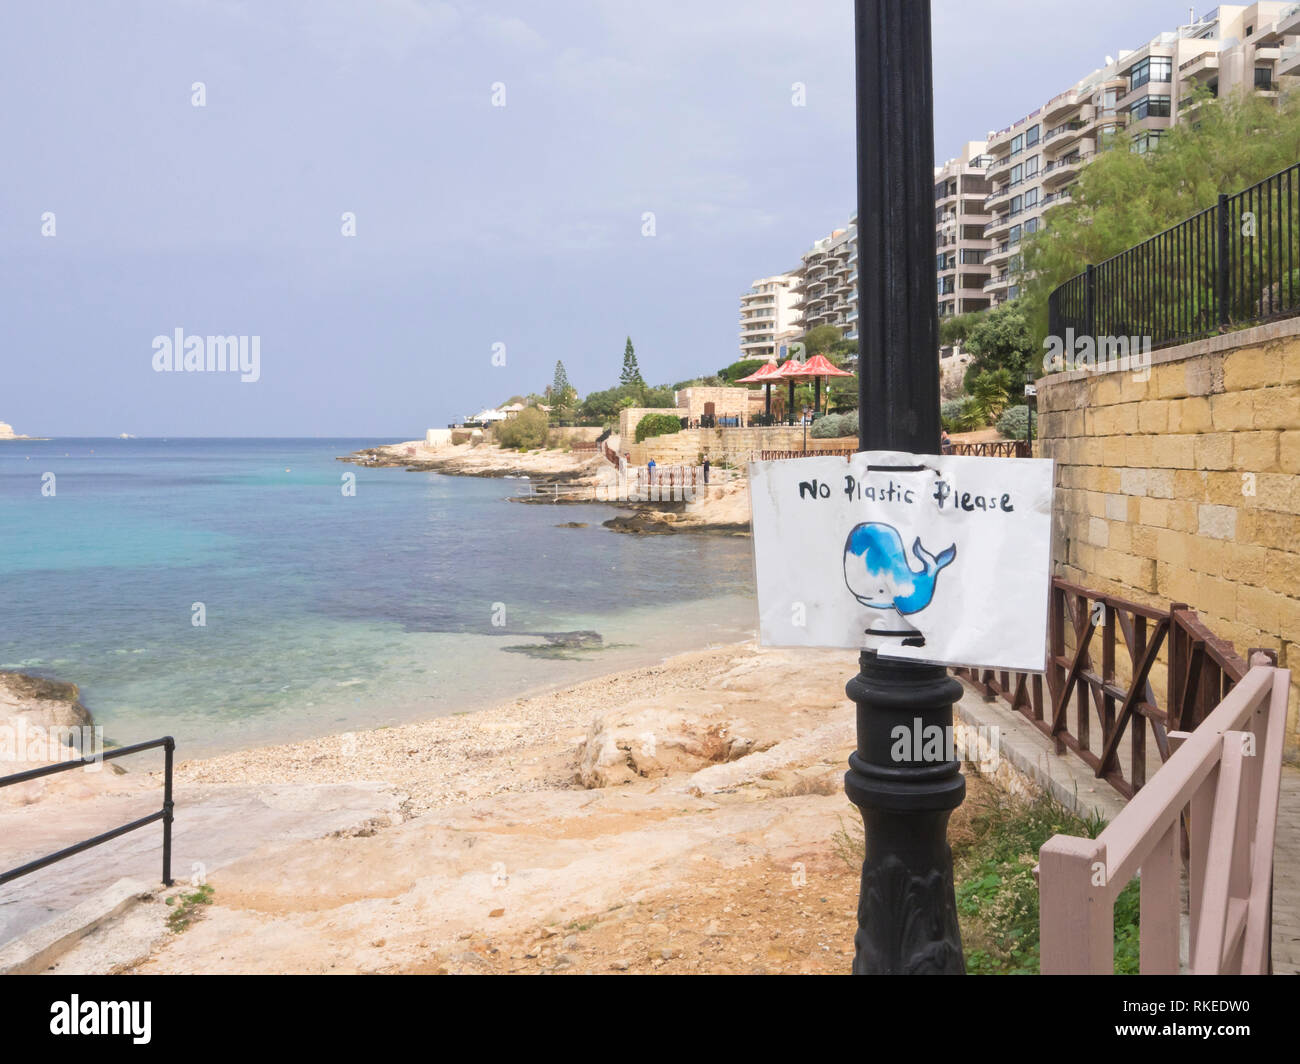 'No plastic please' humorous but important sign for environmental protection on the beach and coastal promenade in Sliema Malta Stock Photo